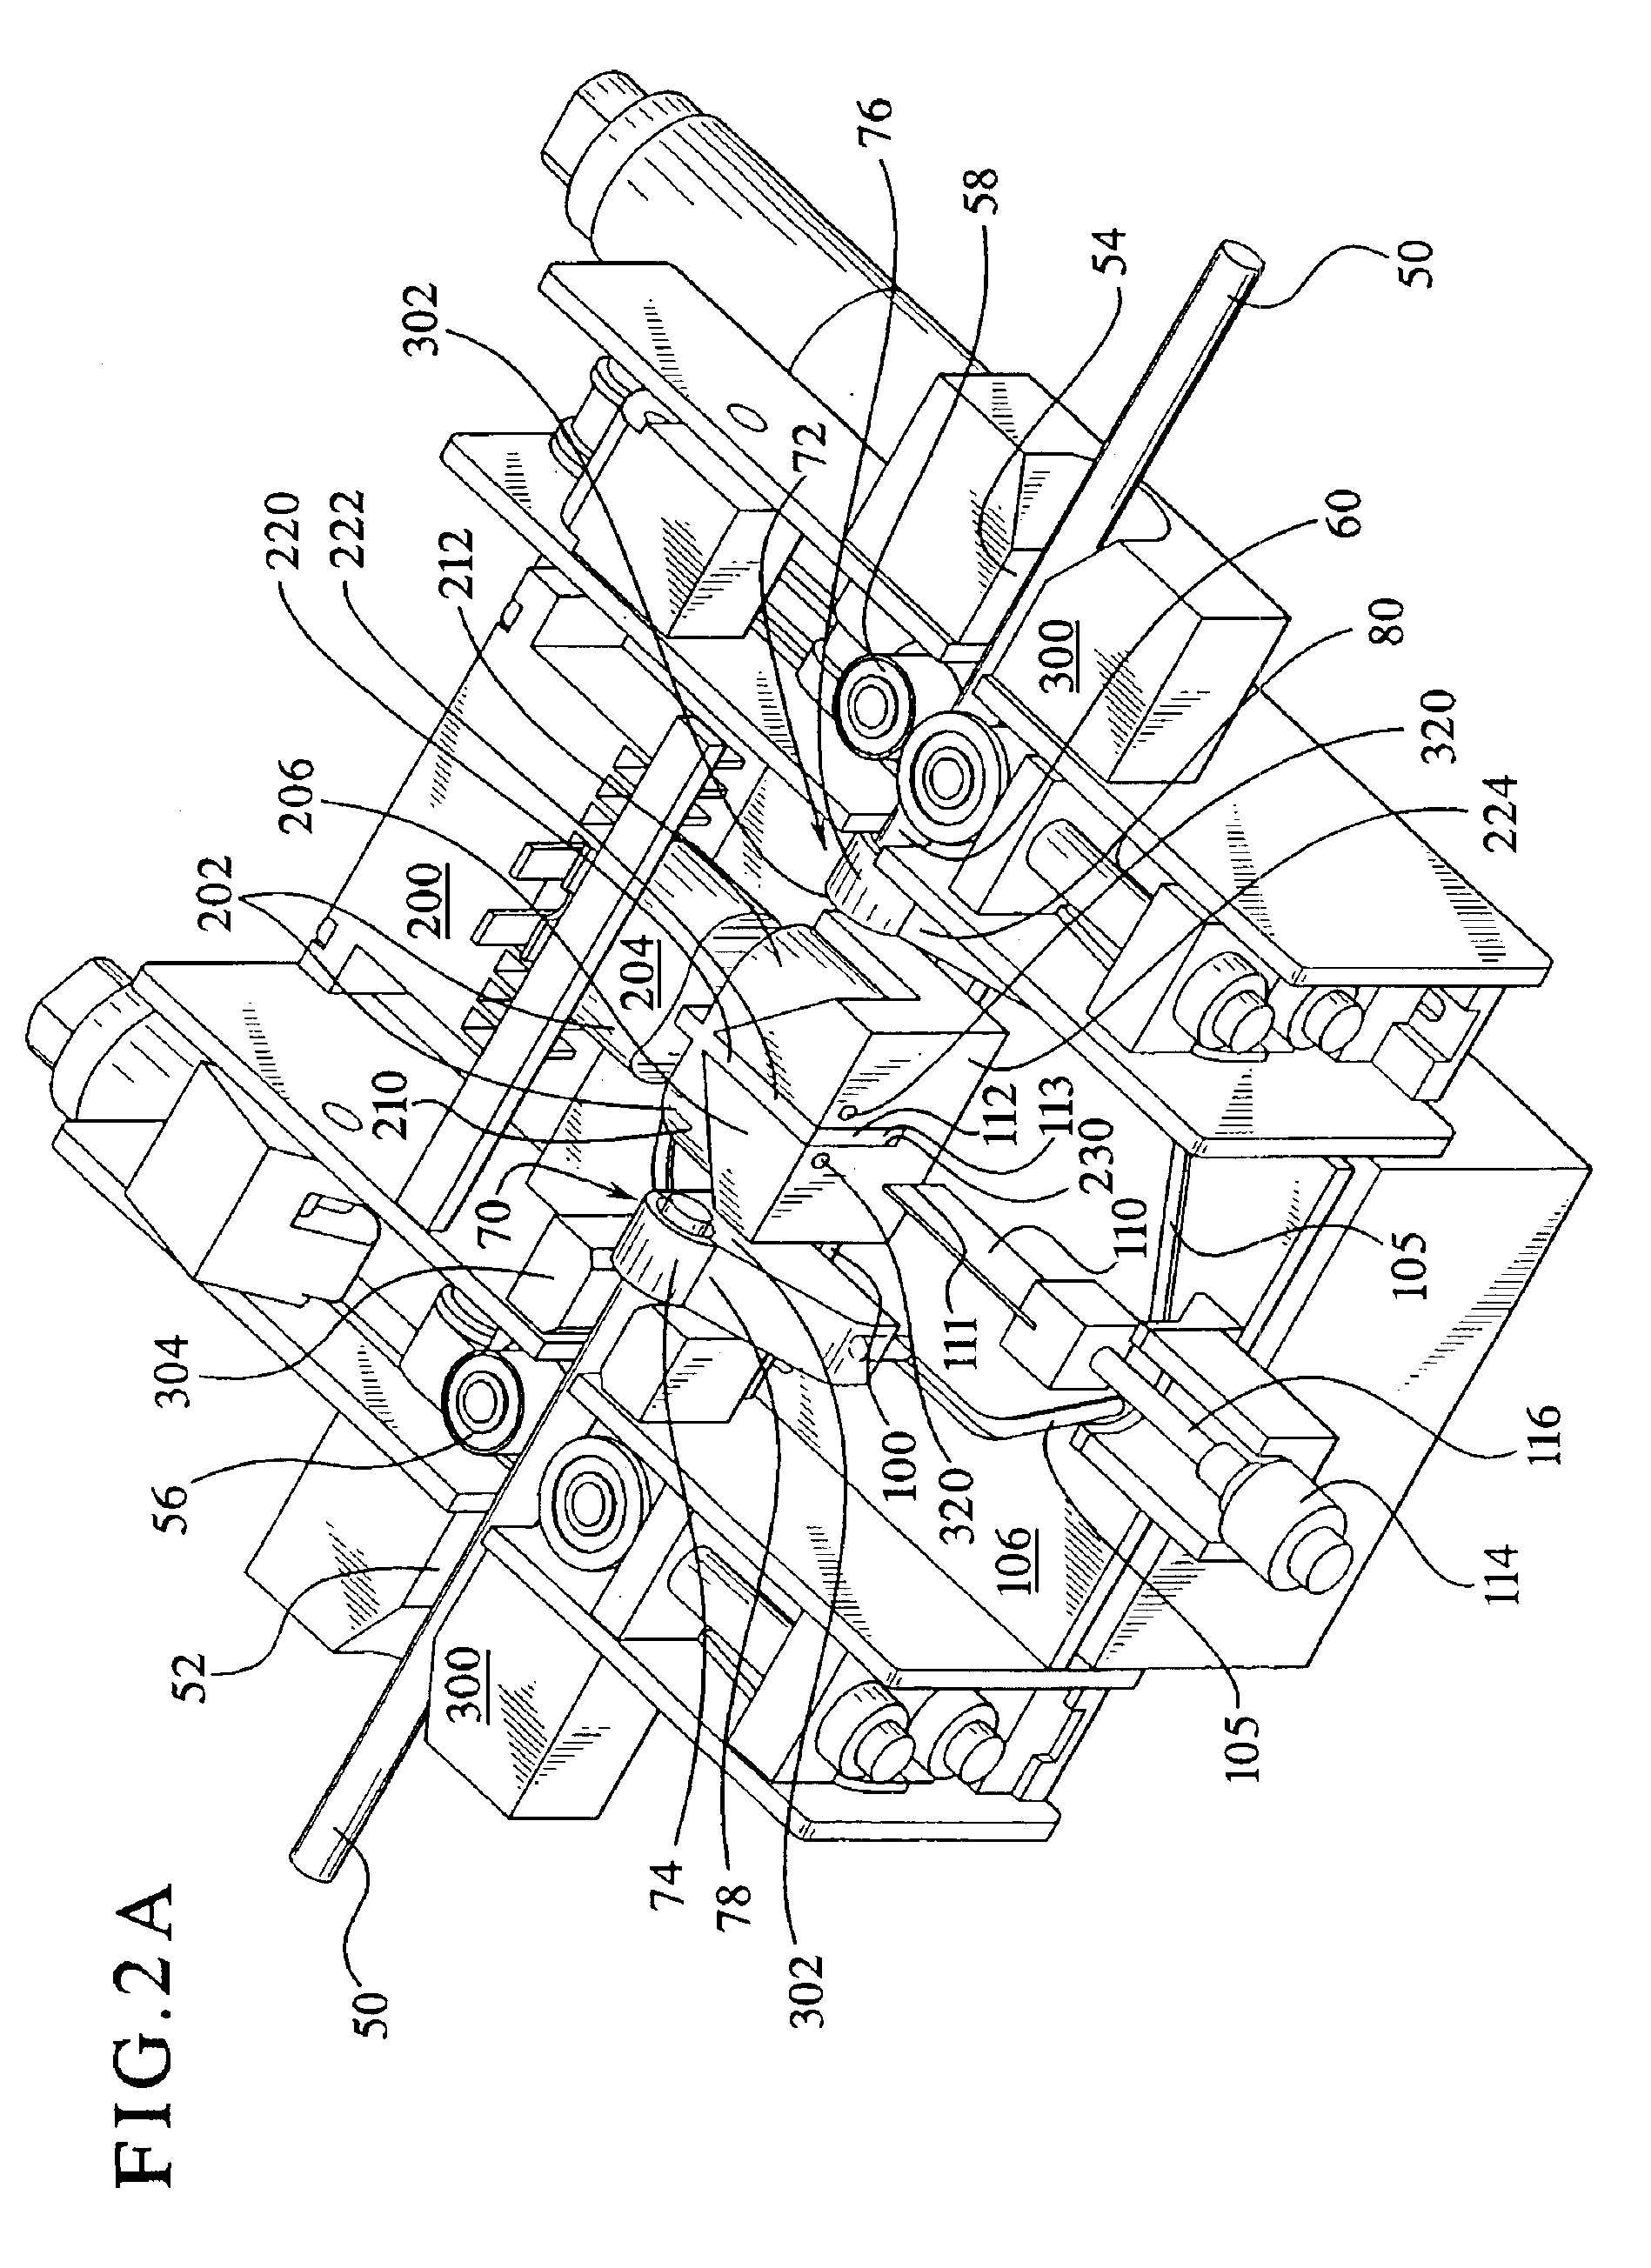 Apparatus and method for connecting and disconnecting flexible tubing